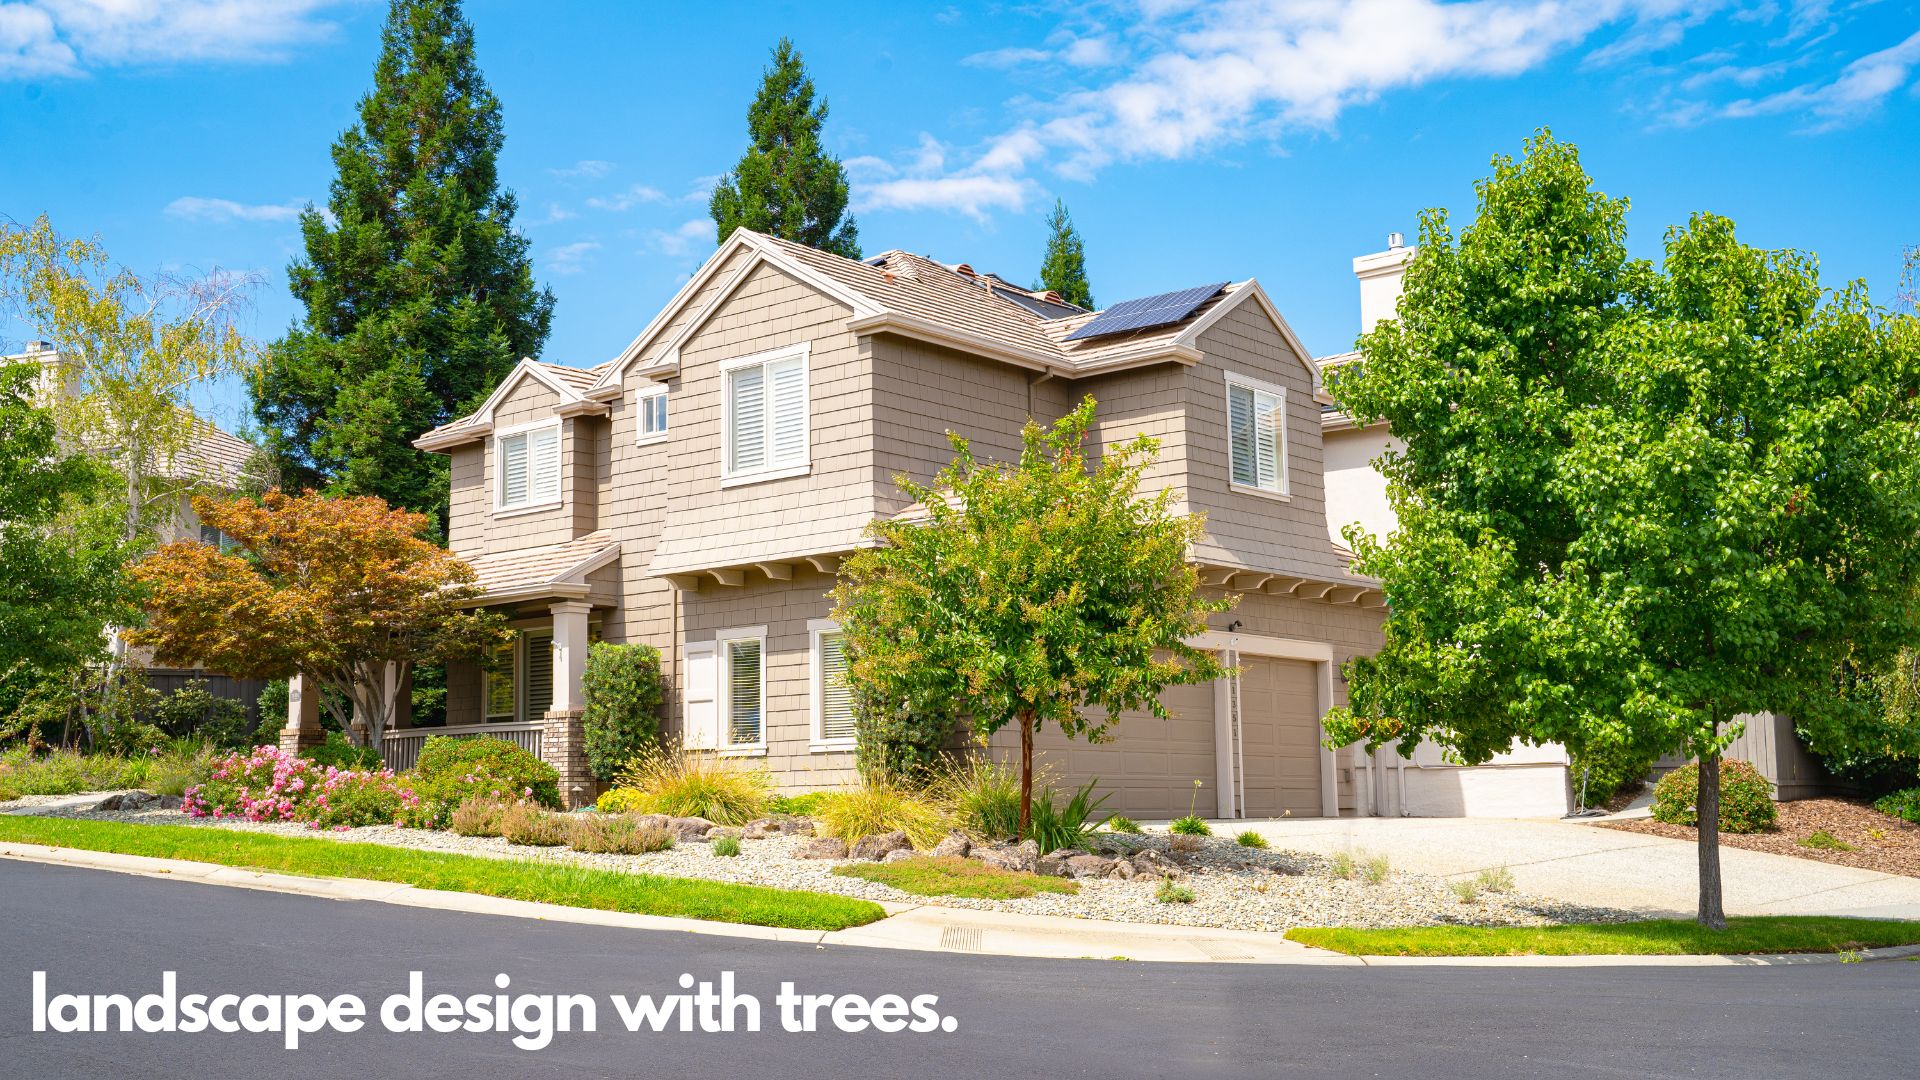 Landscape design with trees